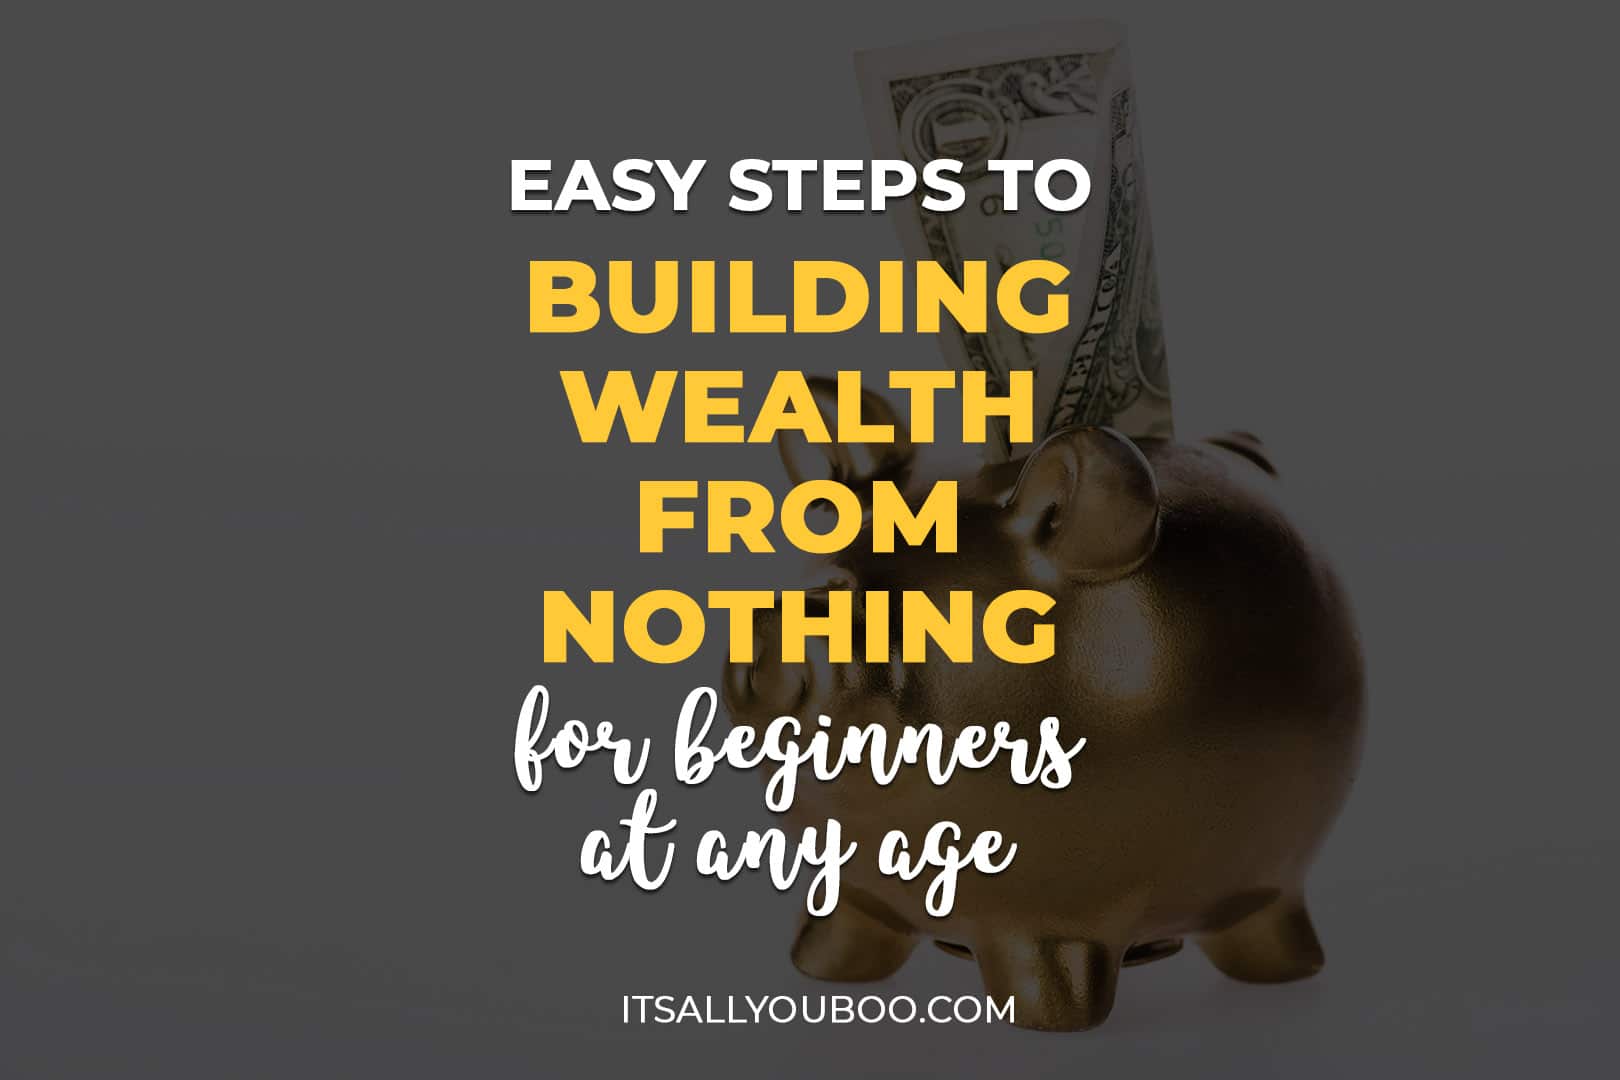 Easy Steps to Building Wealth from Nothing for Beginners at Any Age